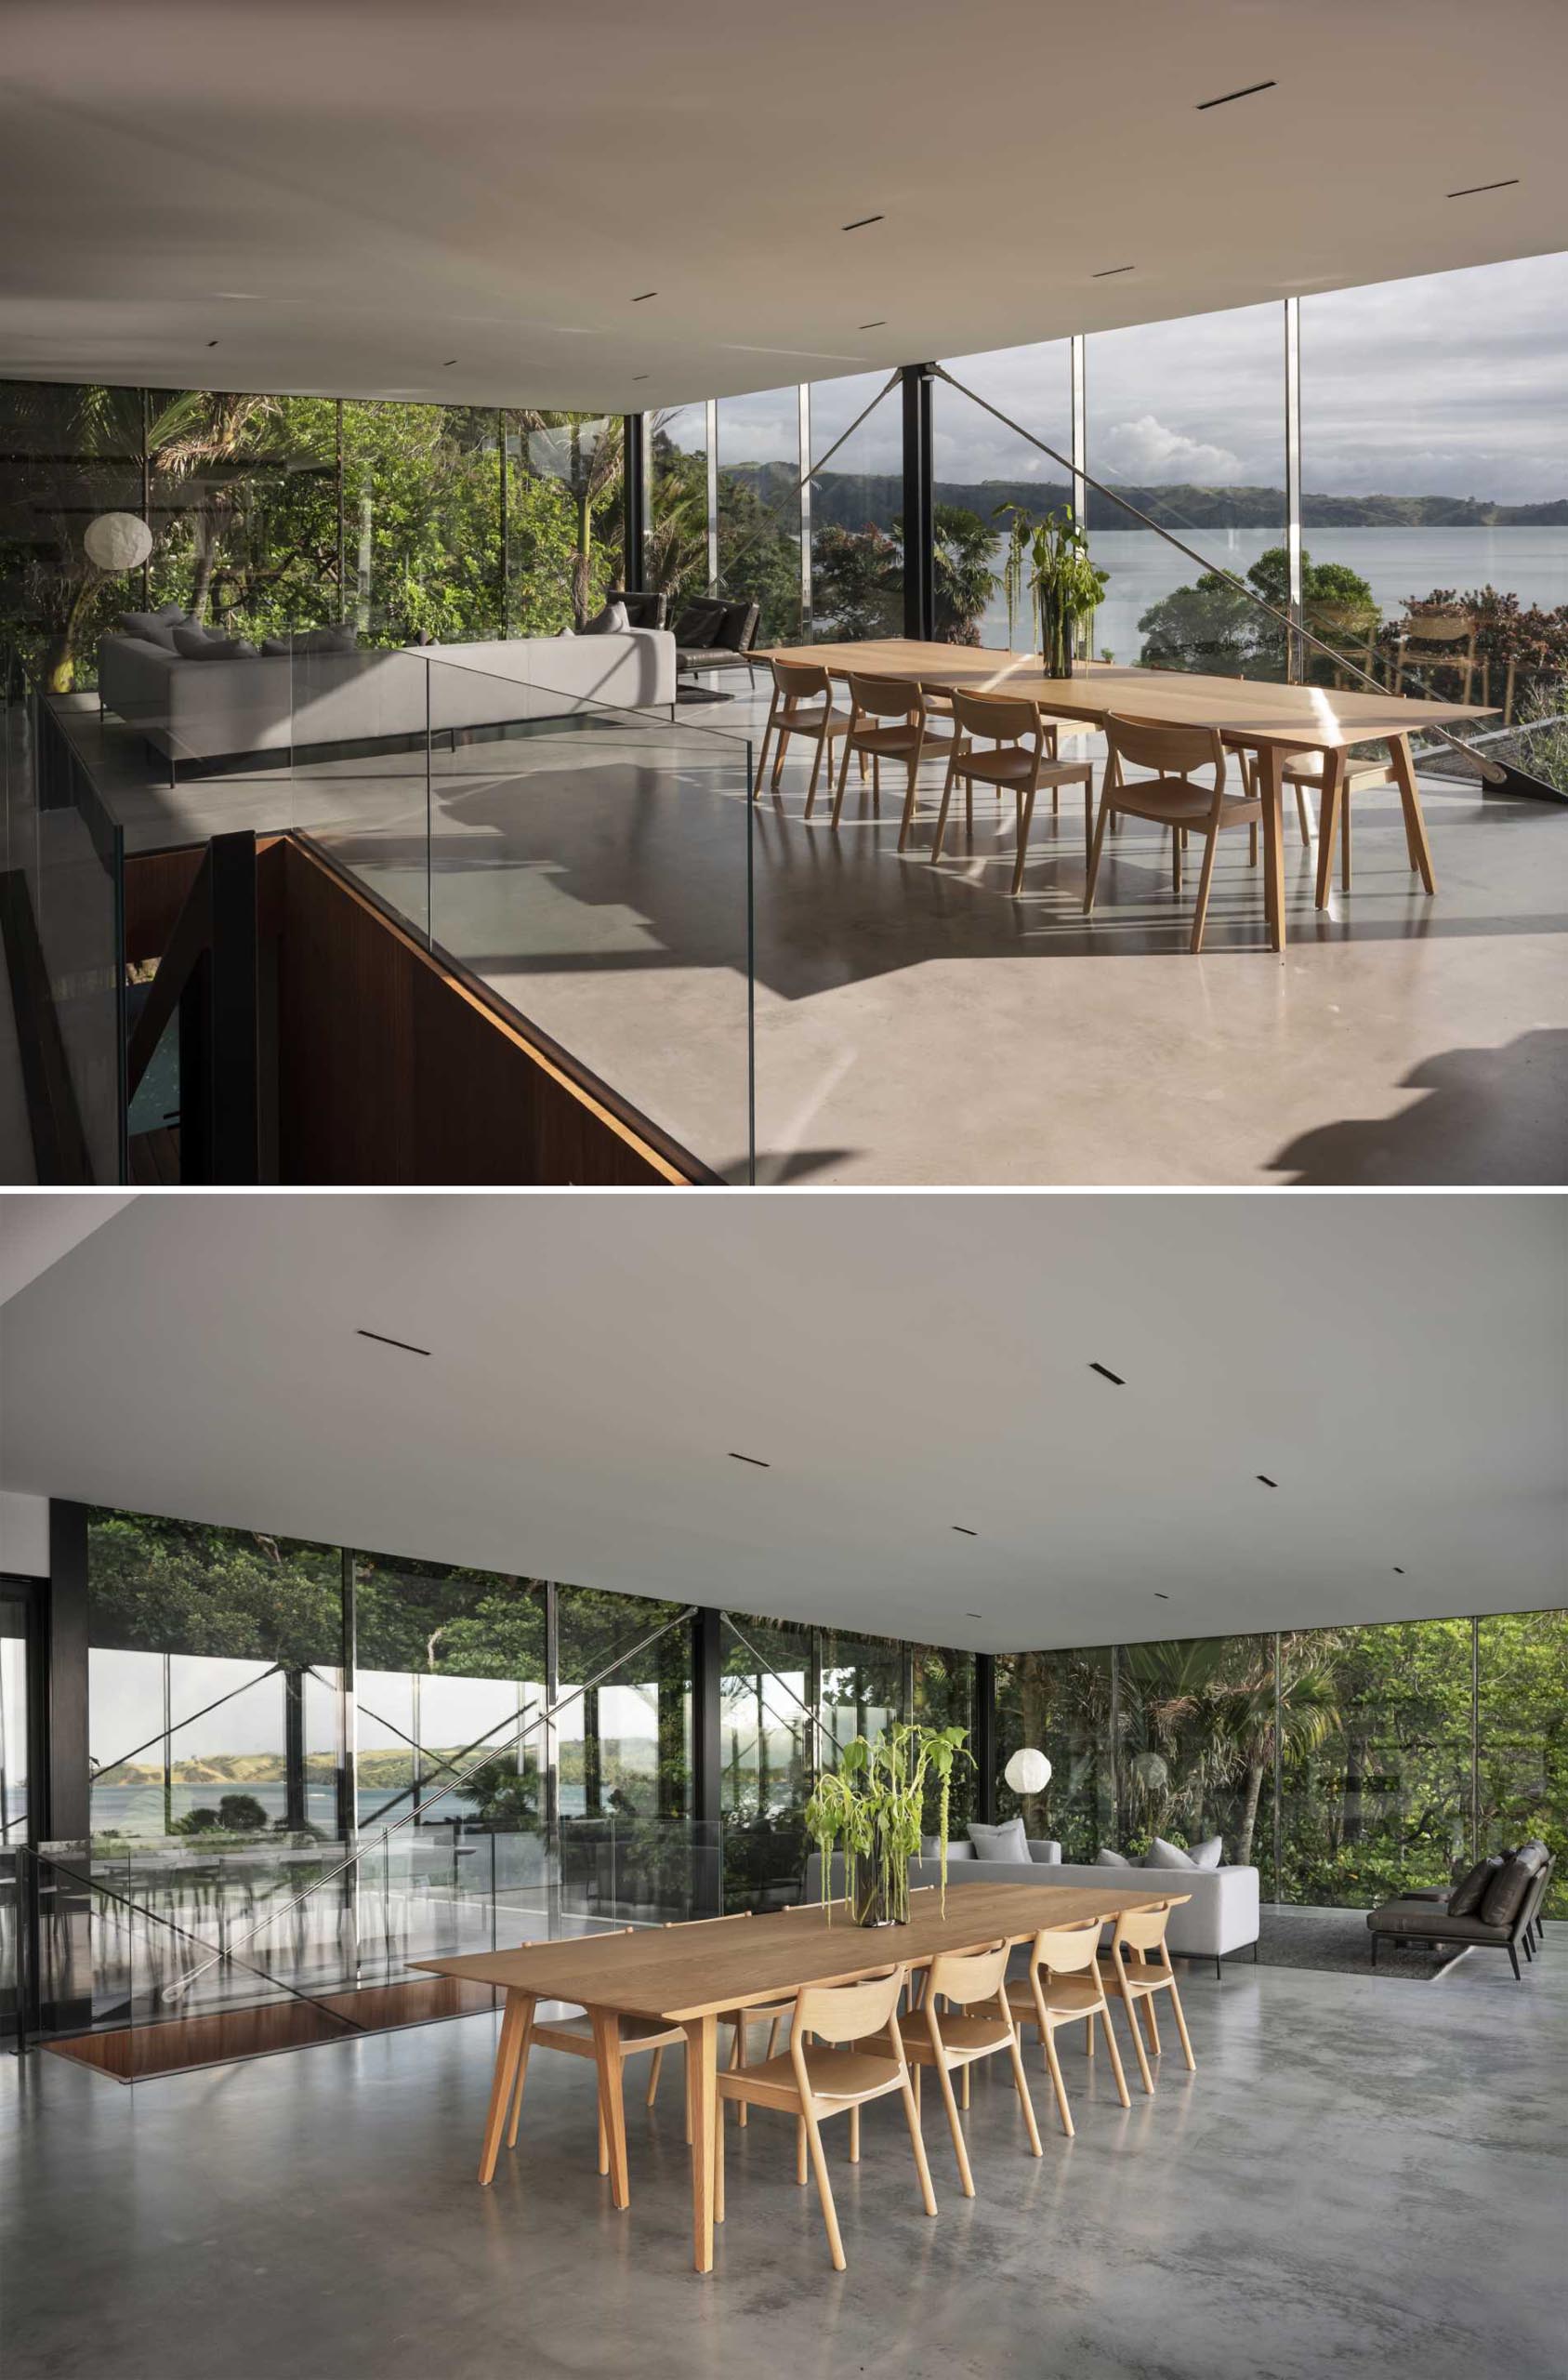 In this modern home with glass walls, there's an open-plan dining area that's furnished with a large wood table and matching chairs.